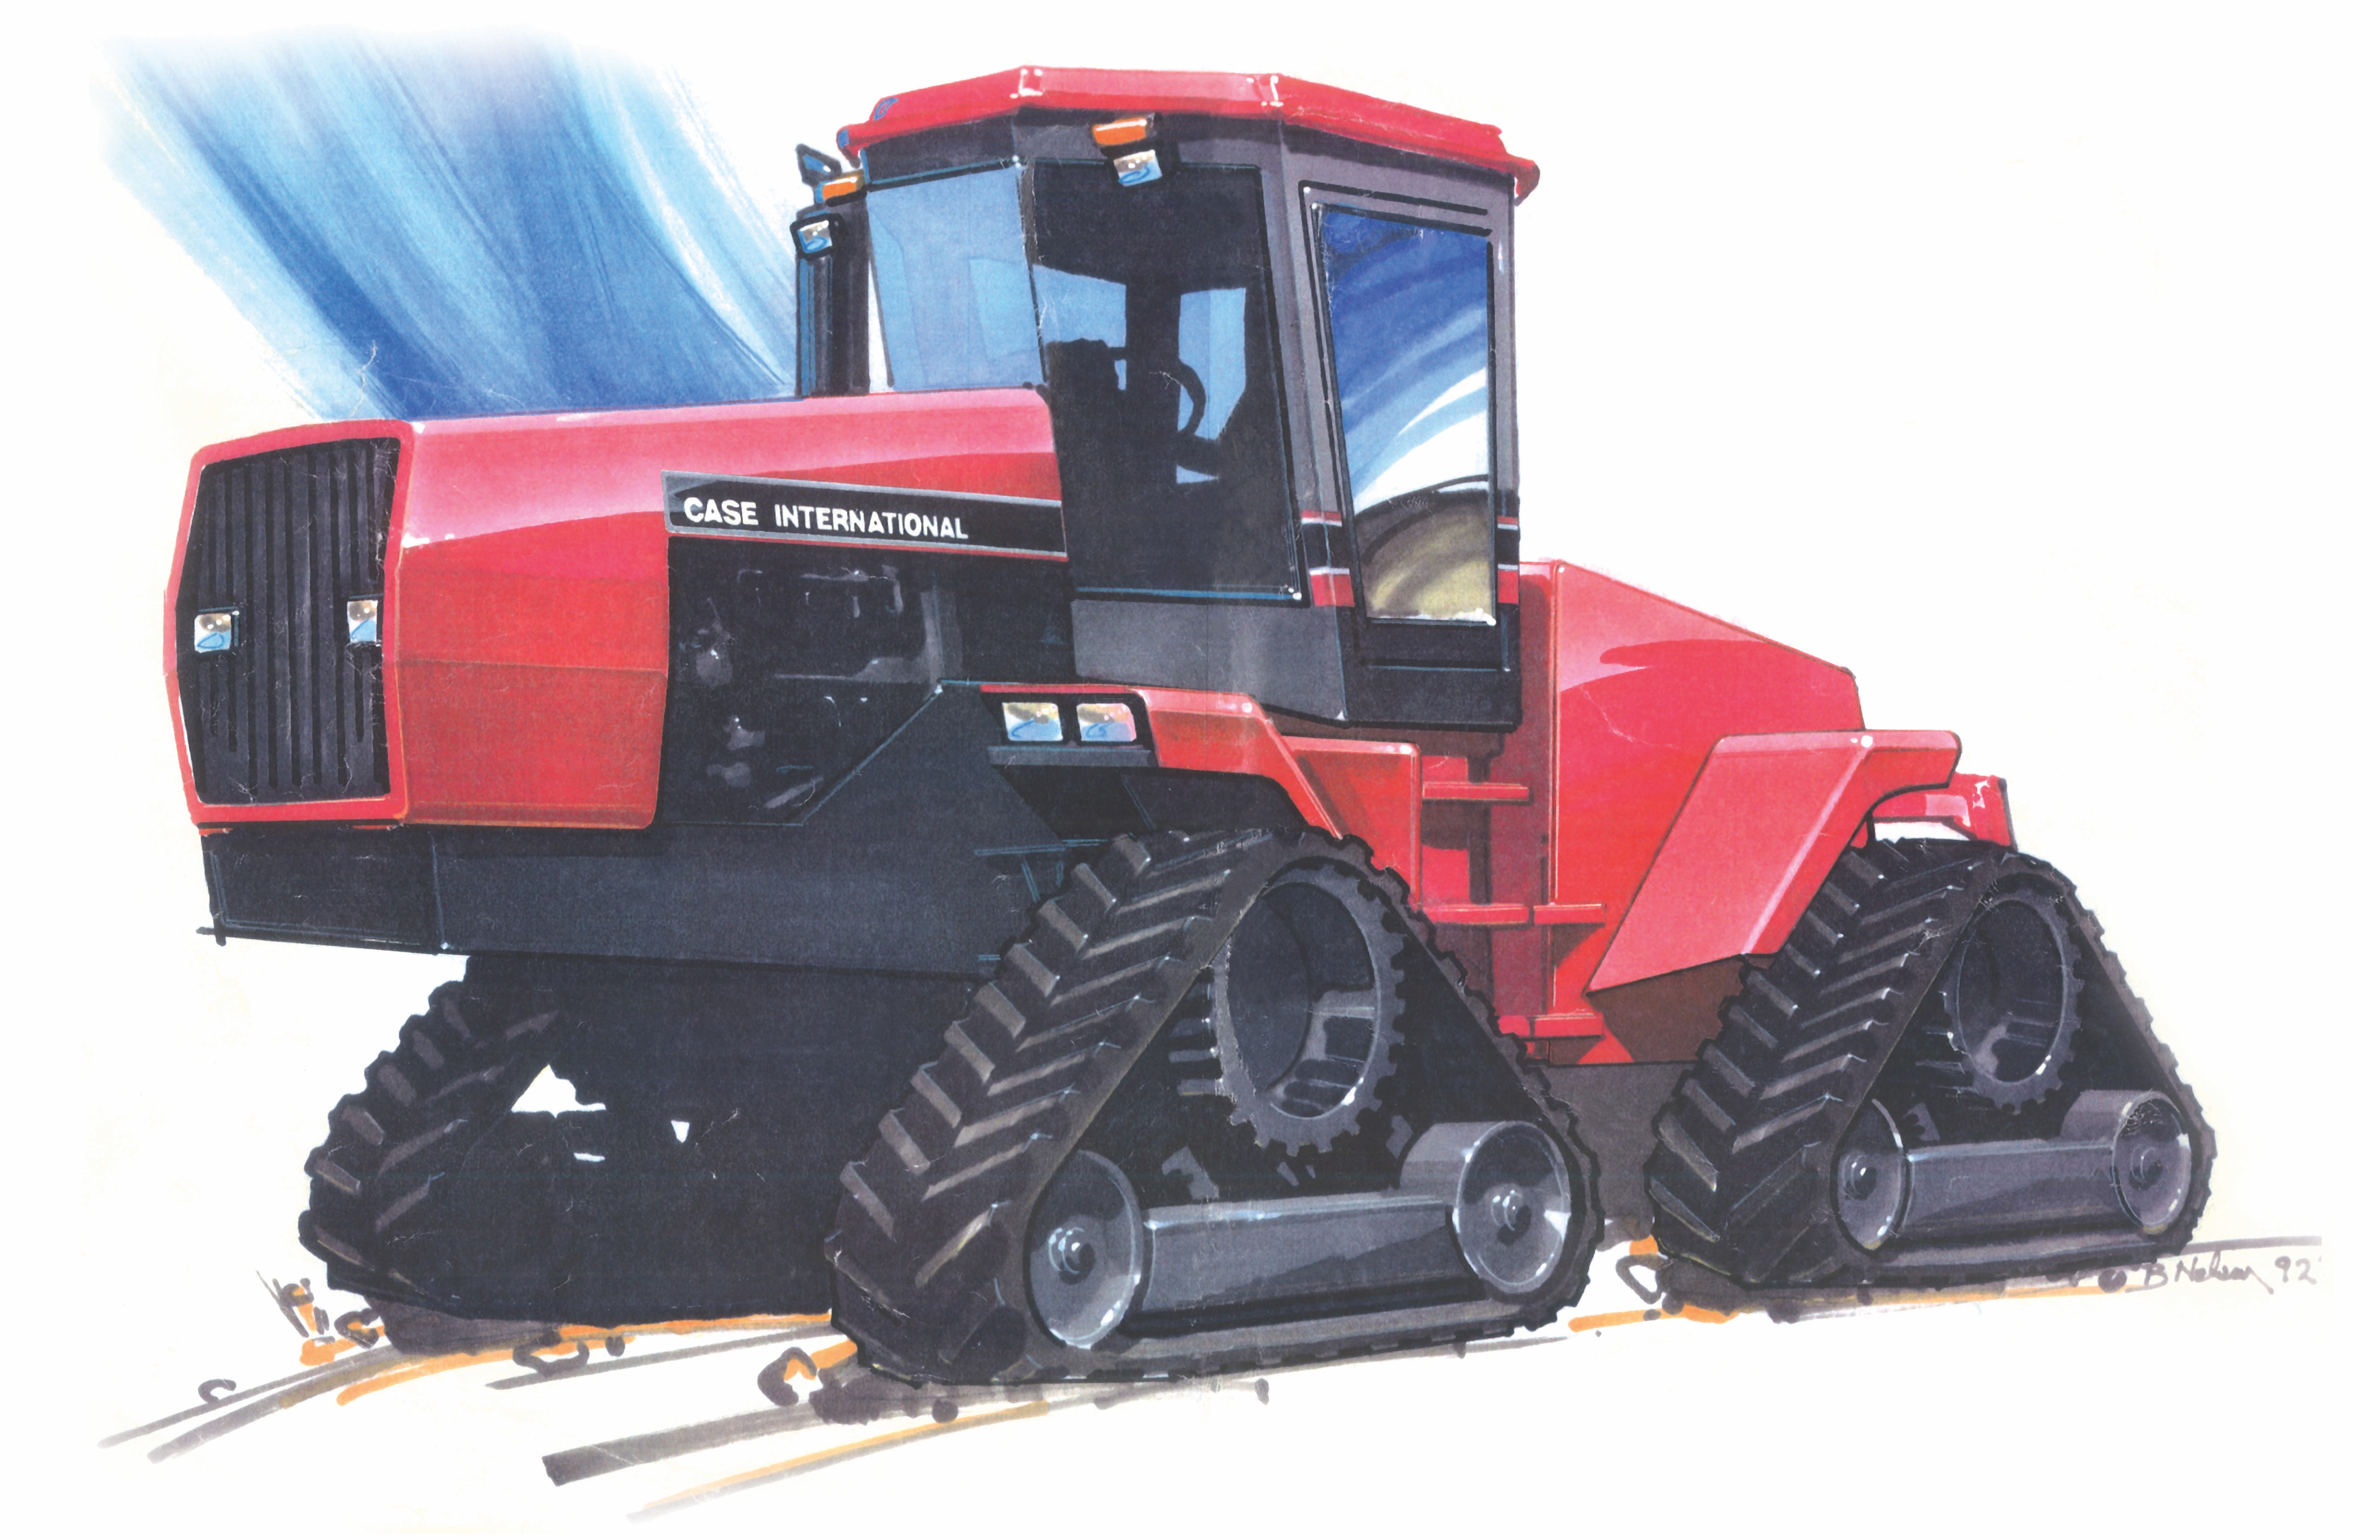 Early concept drawing of the Quadtrac. Case IH